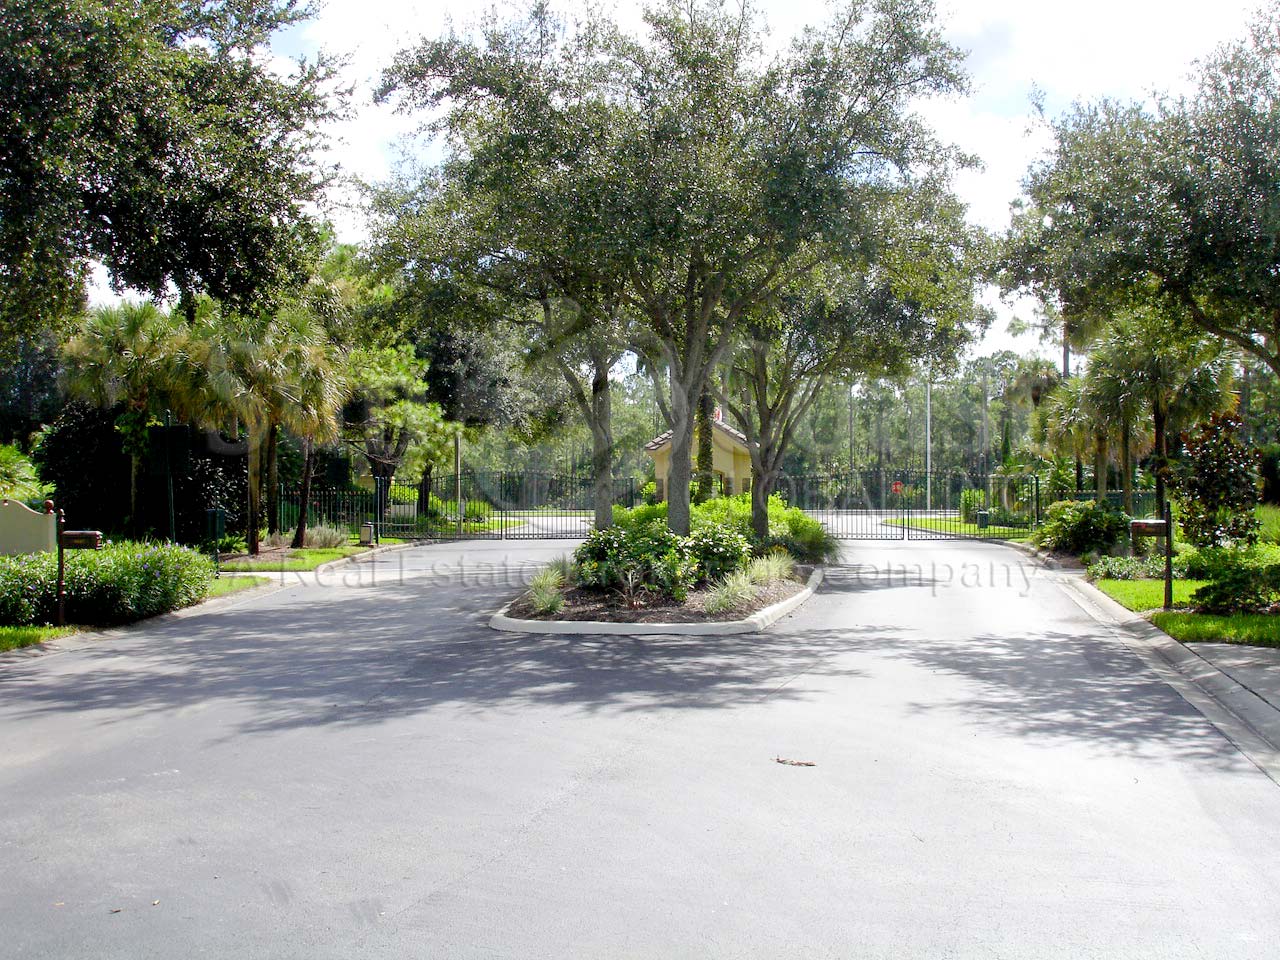 NAPLES HERITAGE Country Club back gated entrance